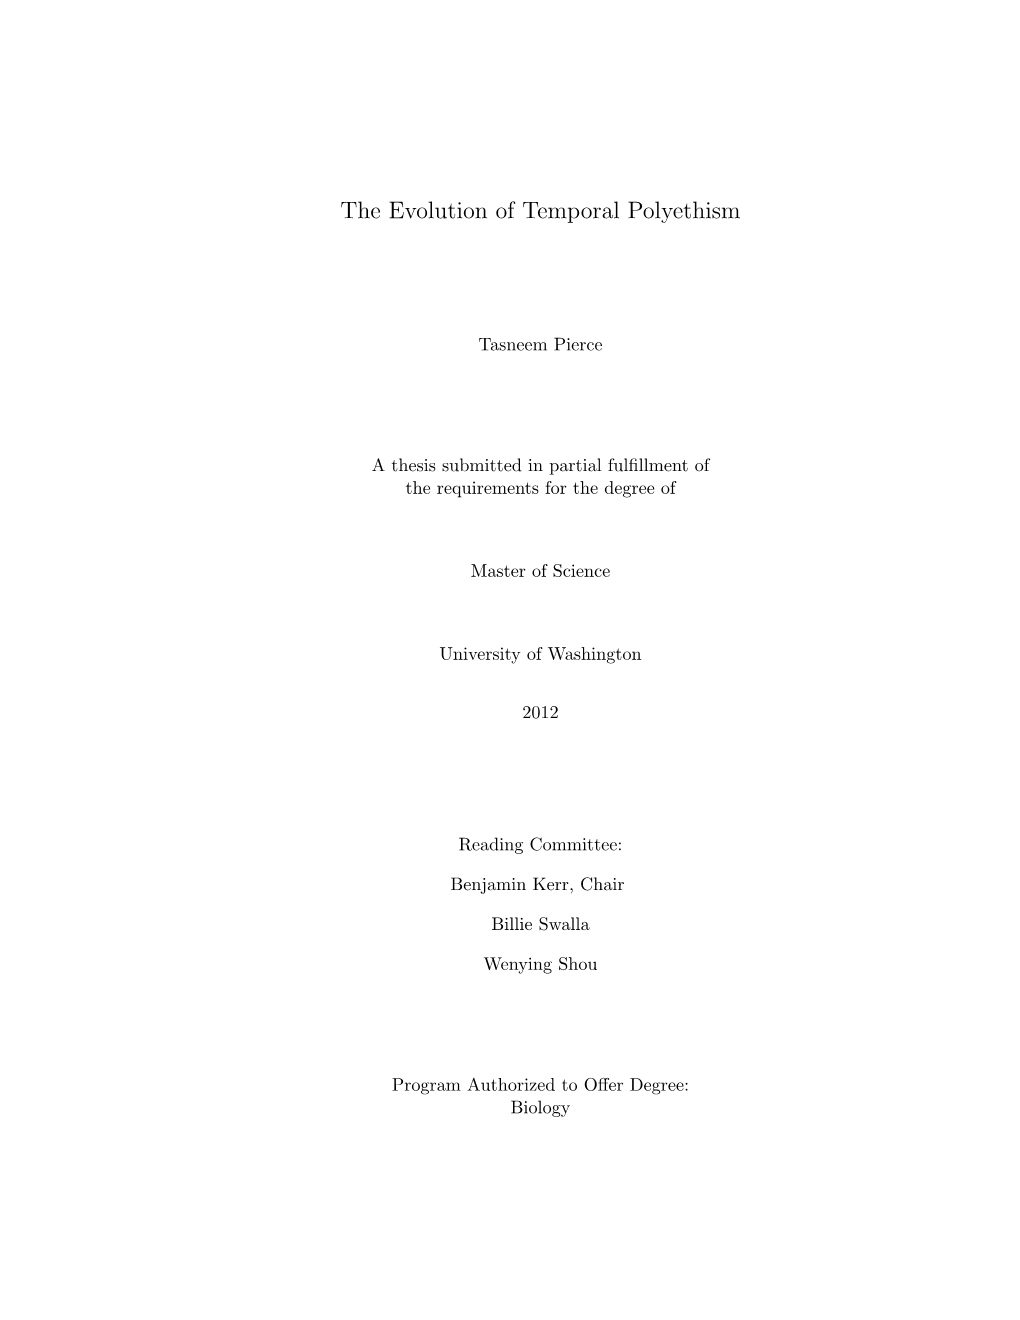 The Evolution of Temporal Polyethism